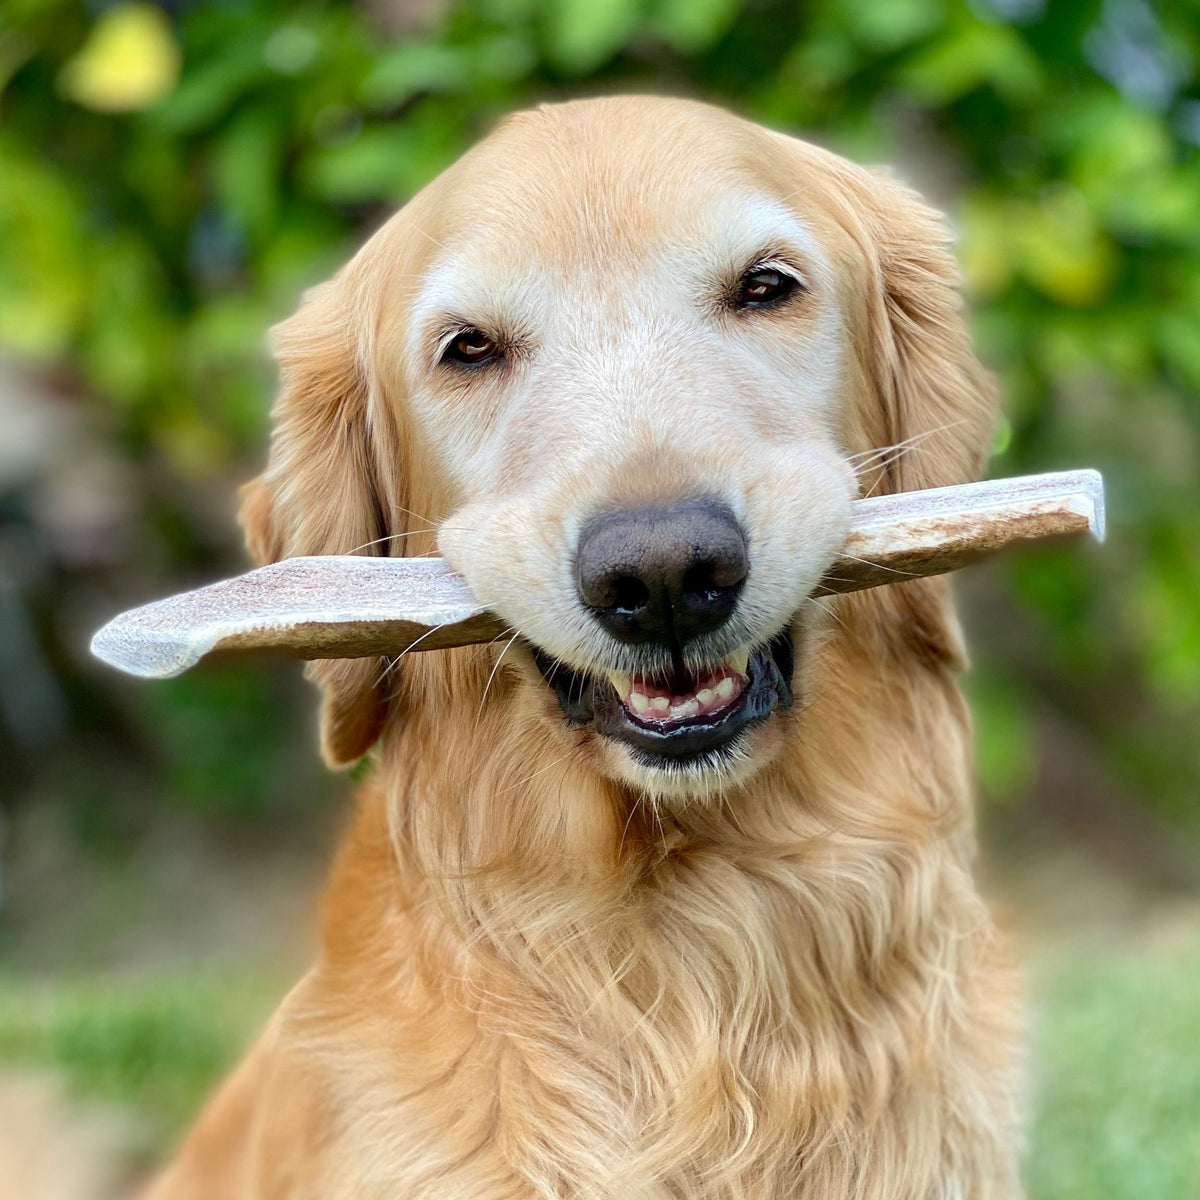 Economy Split Elk Antler Dog Chew 3 Count - Grade B/C Natural Organic and Long Lasting Treats Made from Naturally Shed Antlers in The USA